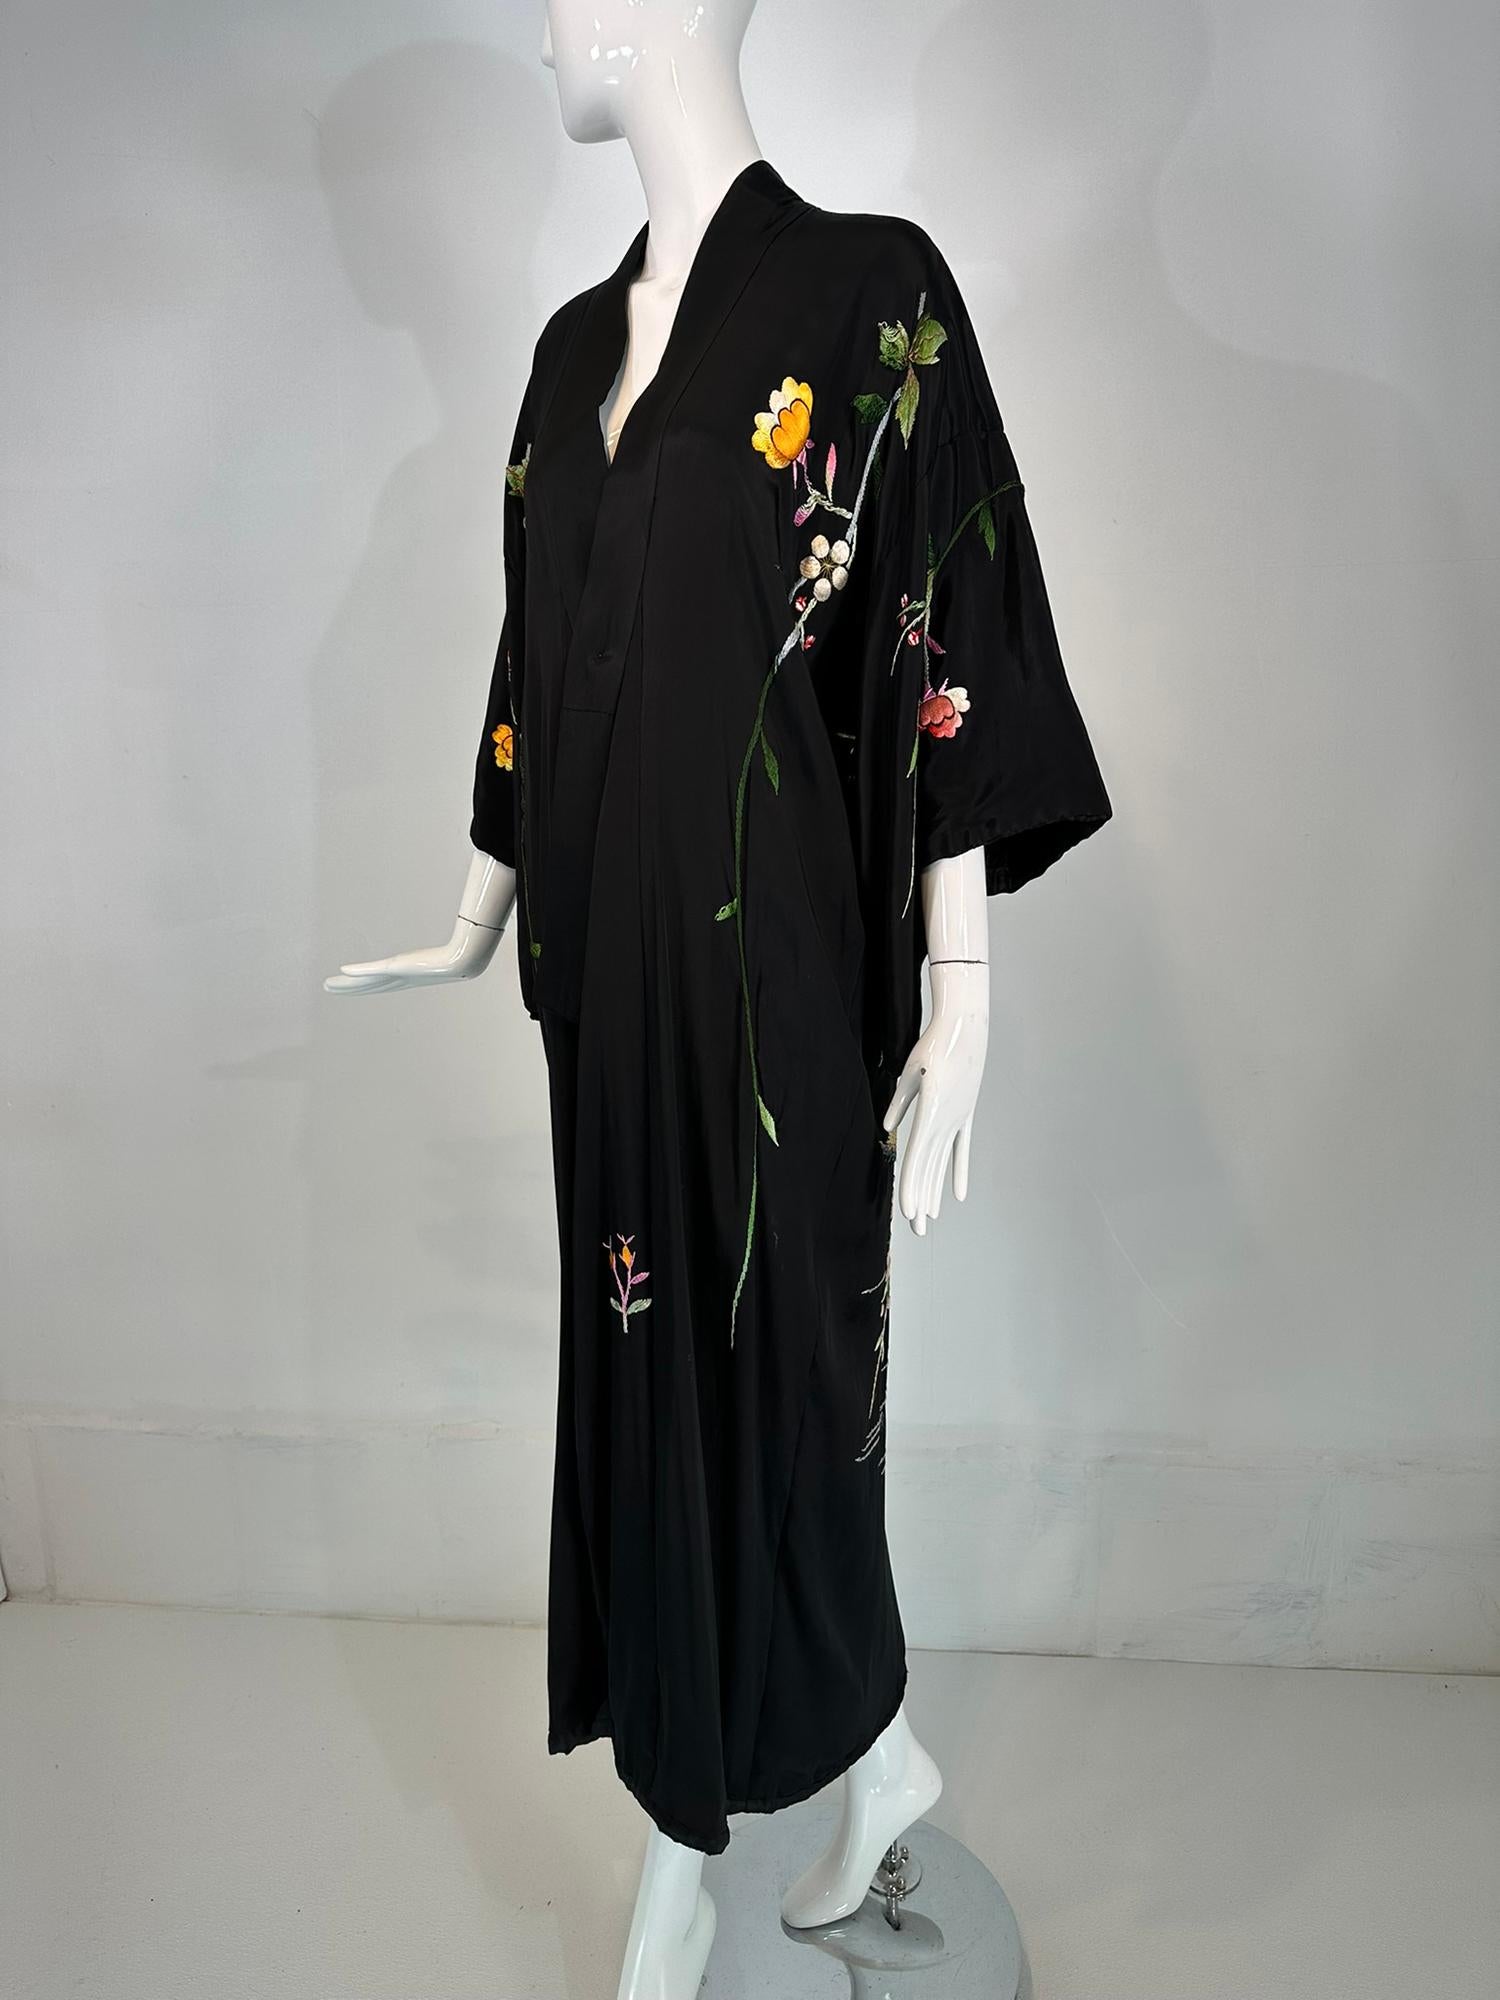 Vintage Black Rayon Heavily Floral Embroidered Kimono Robe 1930s-40s In Good Condition For Sale In West Palm Beach, FL